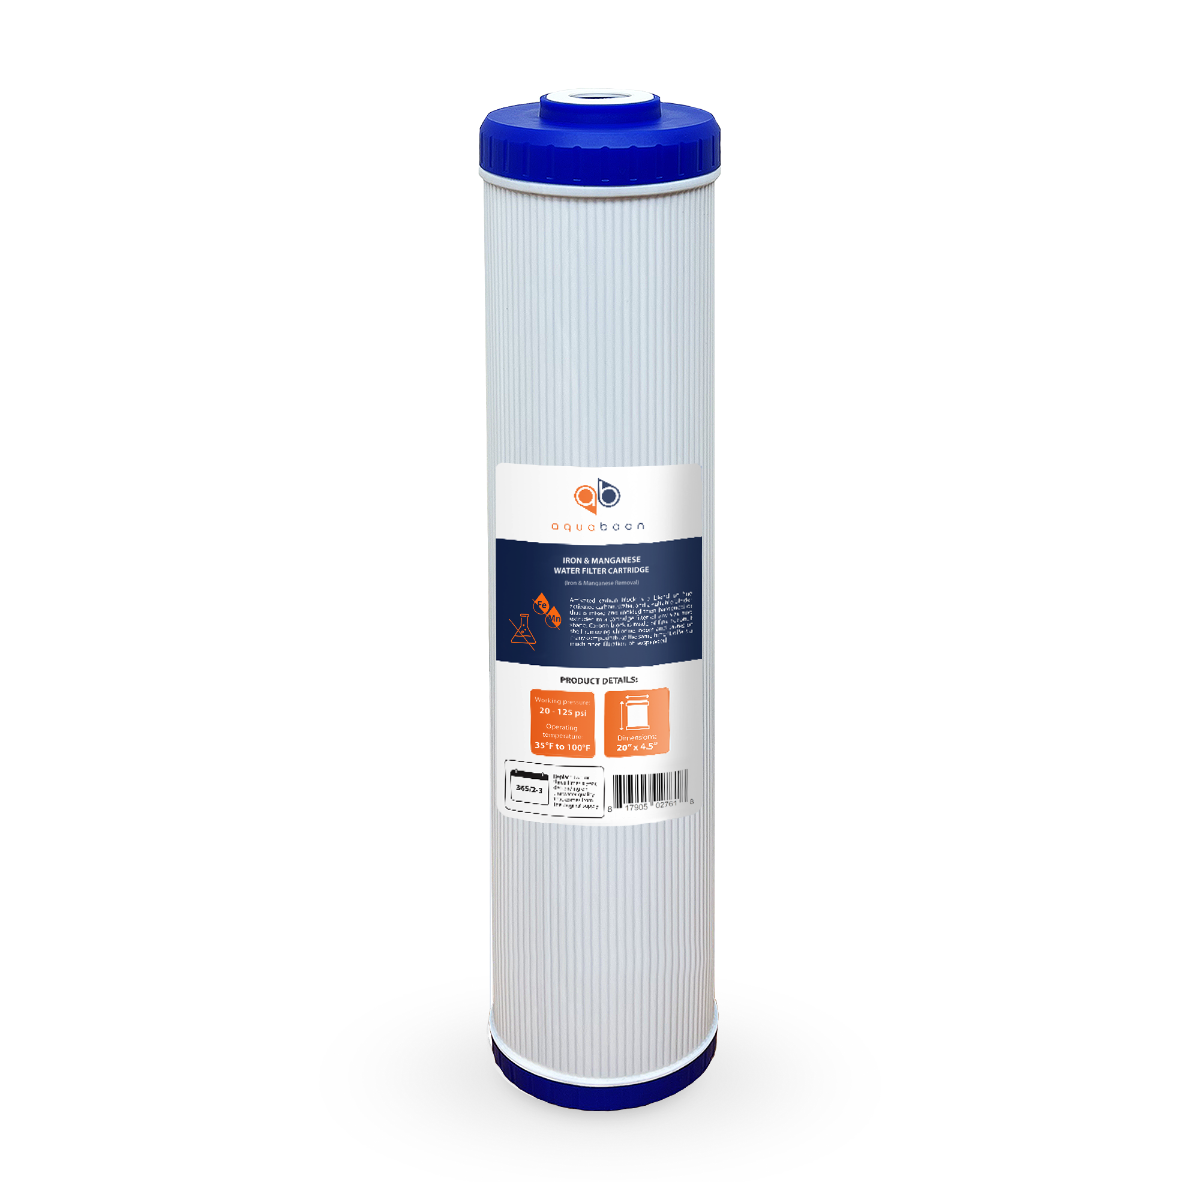 Aquaboon Whole House 20 Inch Big Blue Iron and Manganese Water Filter Cartridge